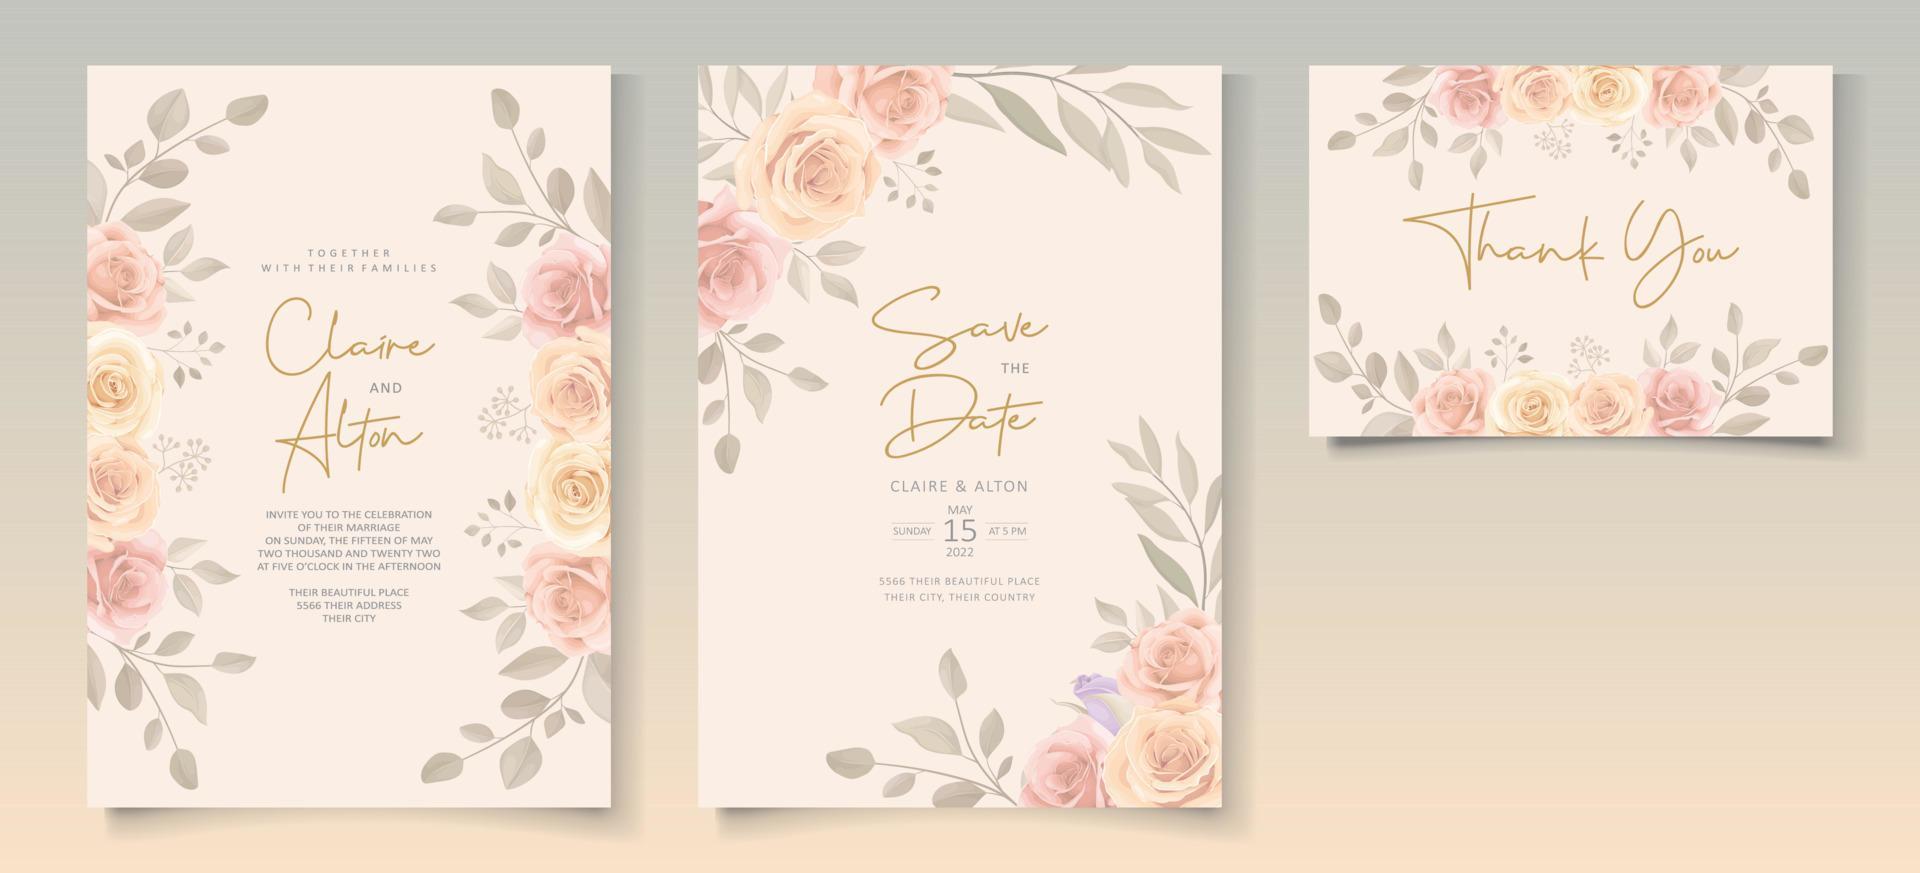 Set of beautiful wedding invitation template with hand drawn roses flower ornament vector